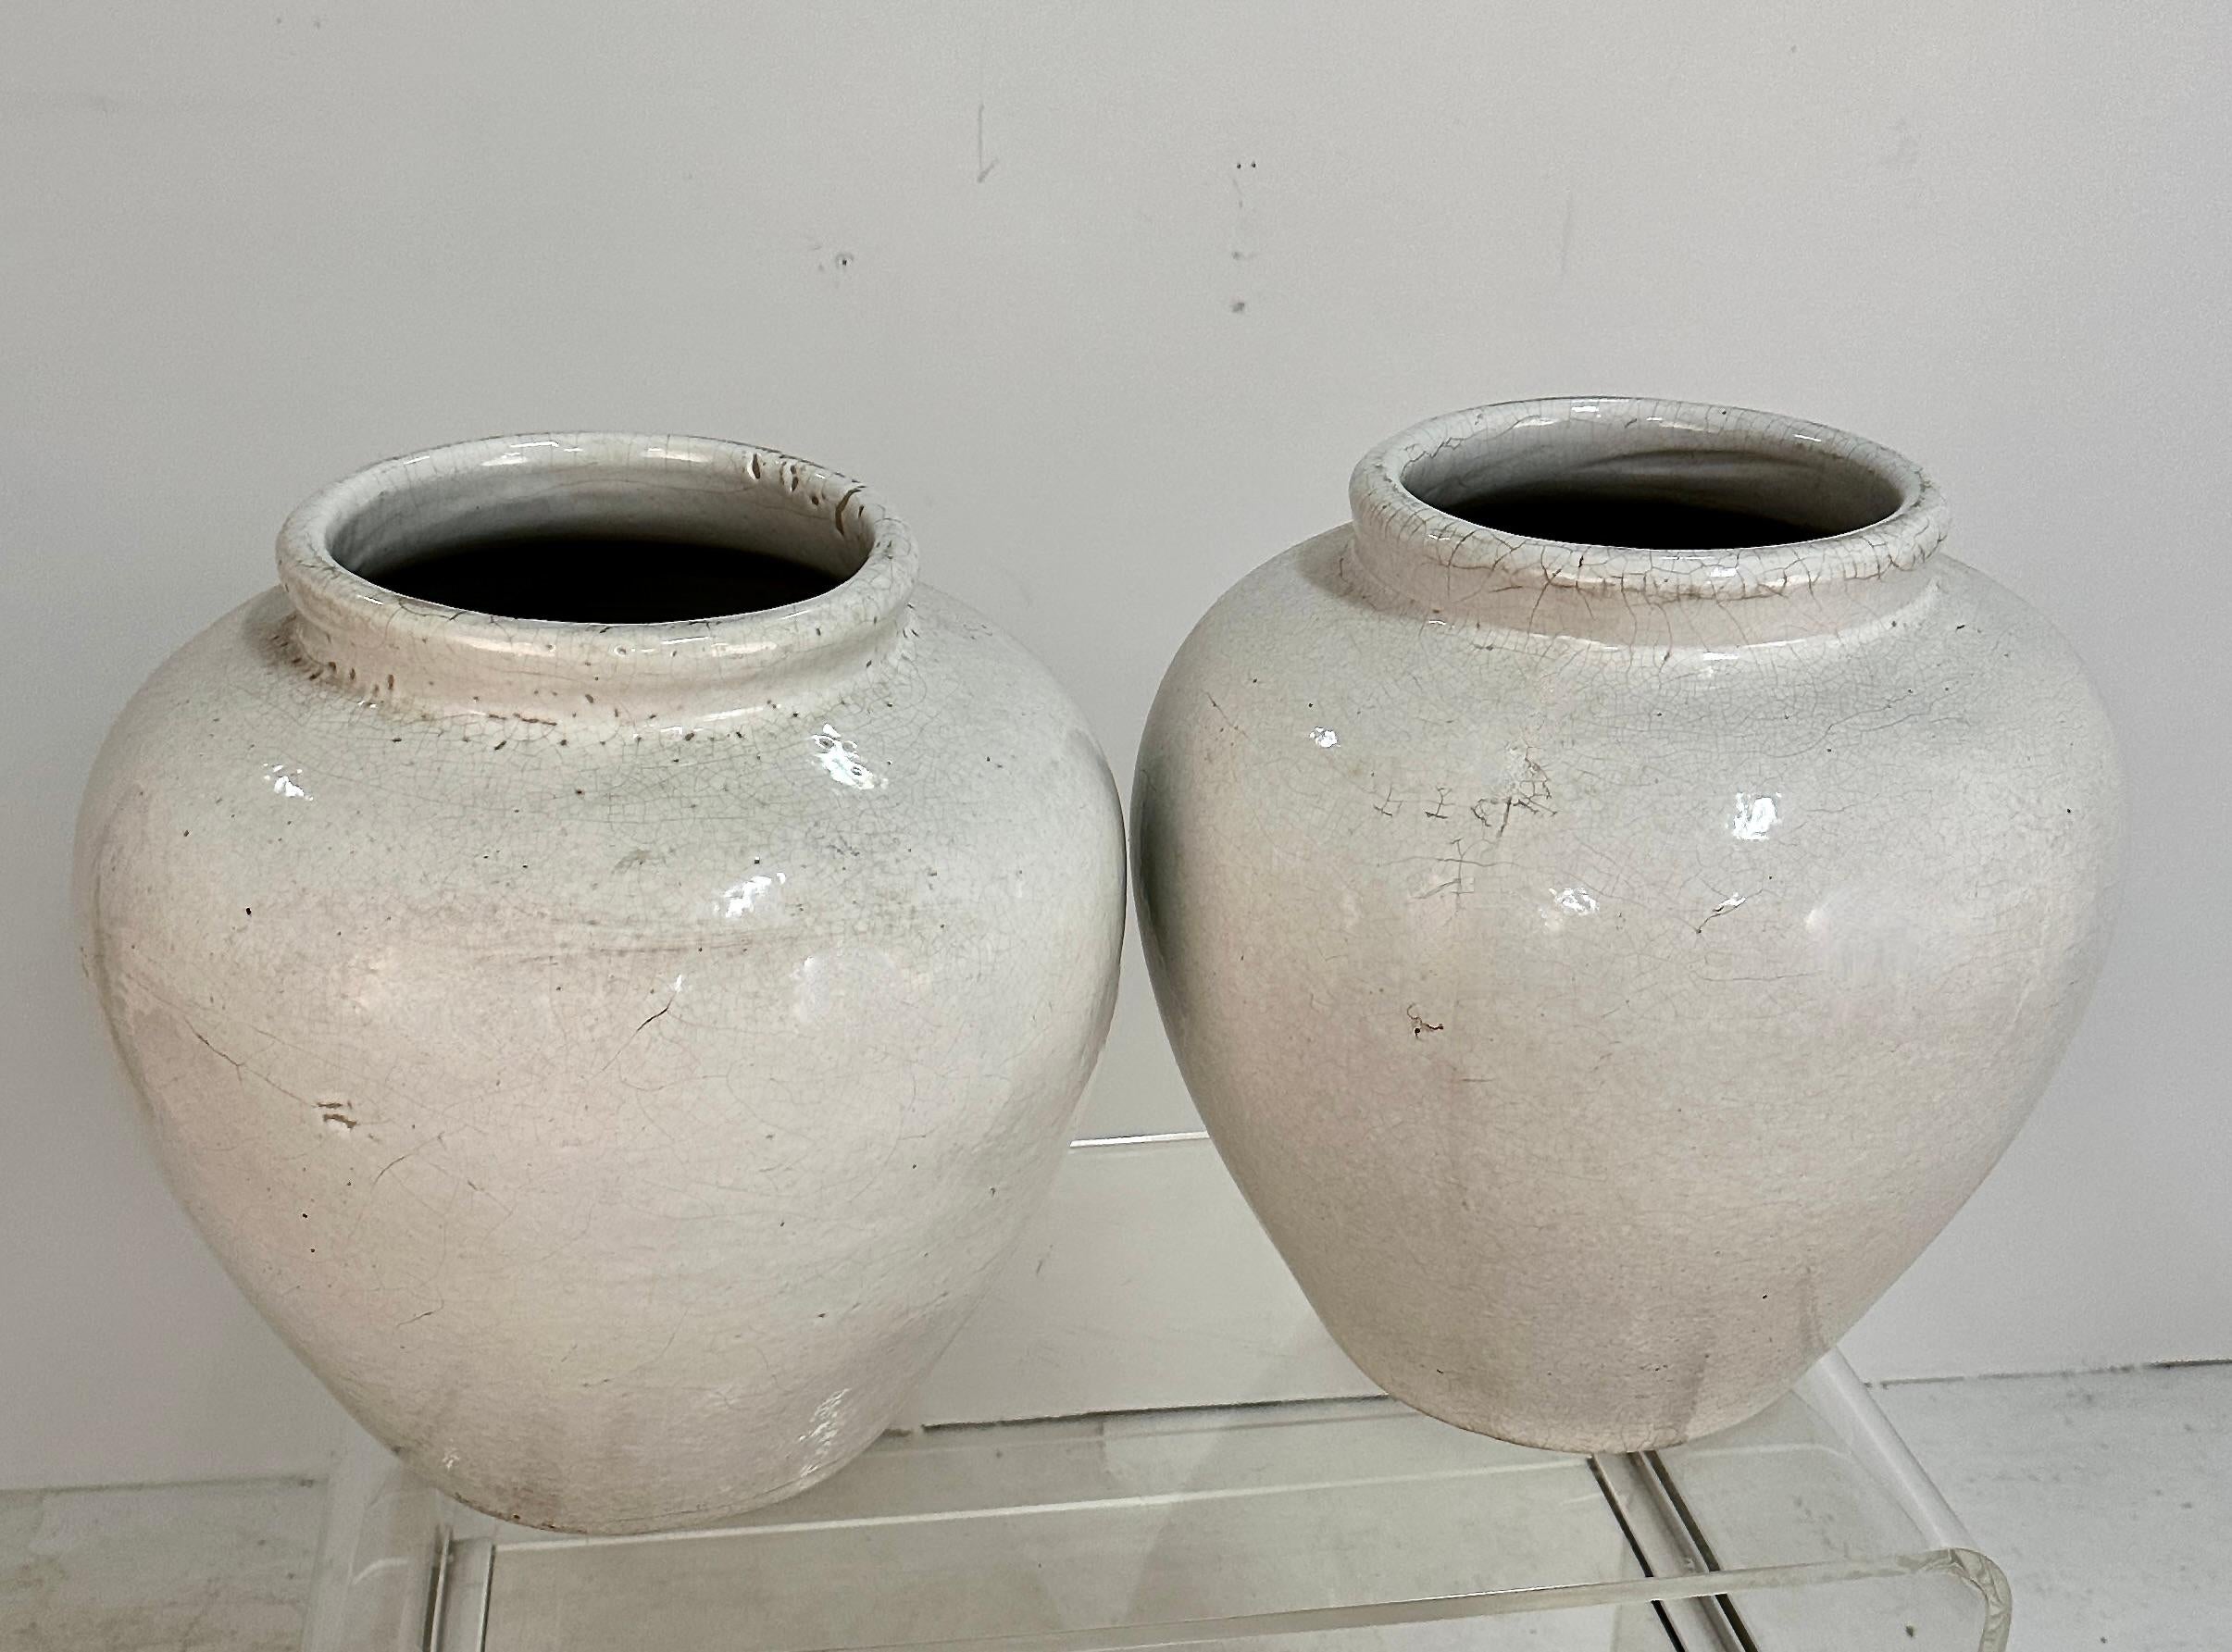 A great pair of heavy ceramic jars. Unfortunately unsigned but almost certainly American art pottery. Lovely glaze and thick-walled construction make them perfect for indoor or outdoor use in temperate zones. The size is useful at 16